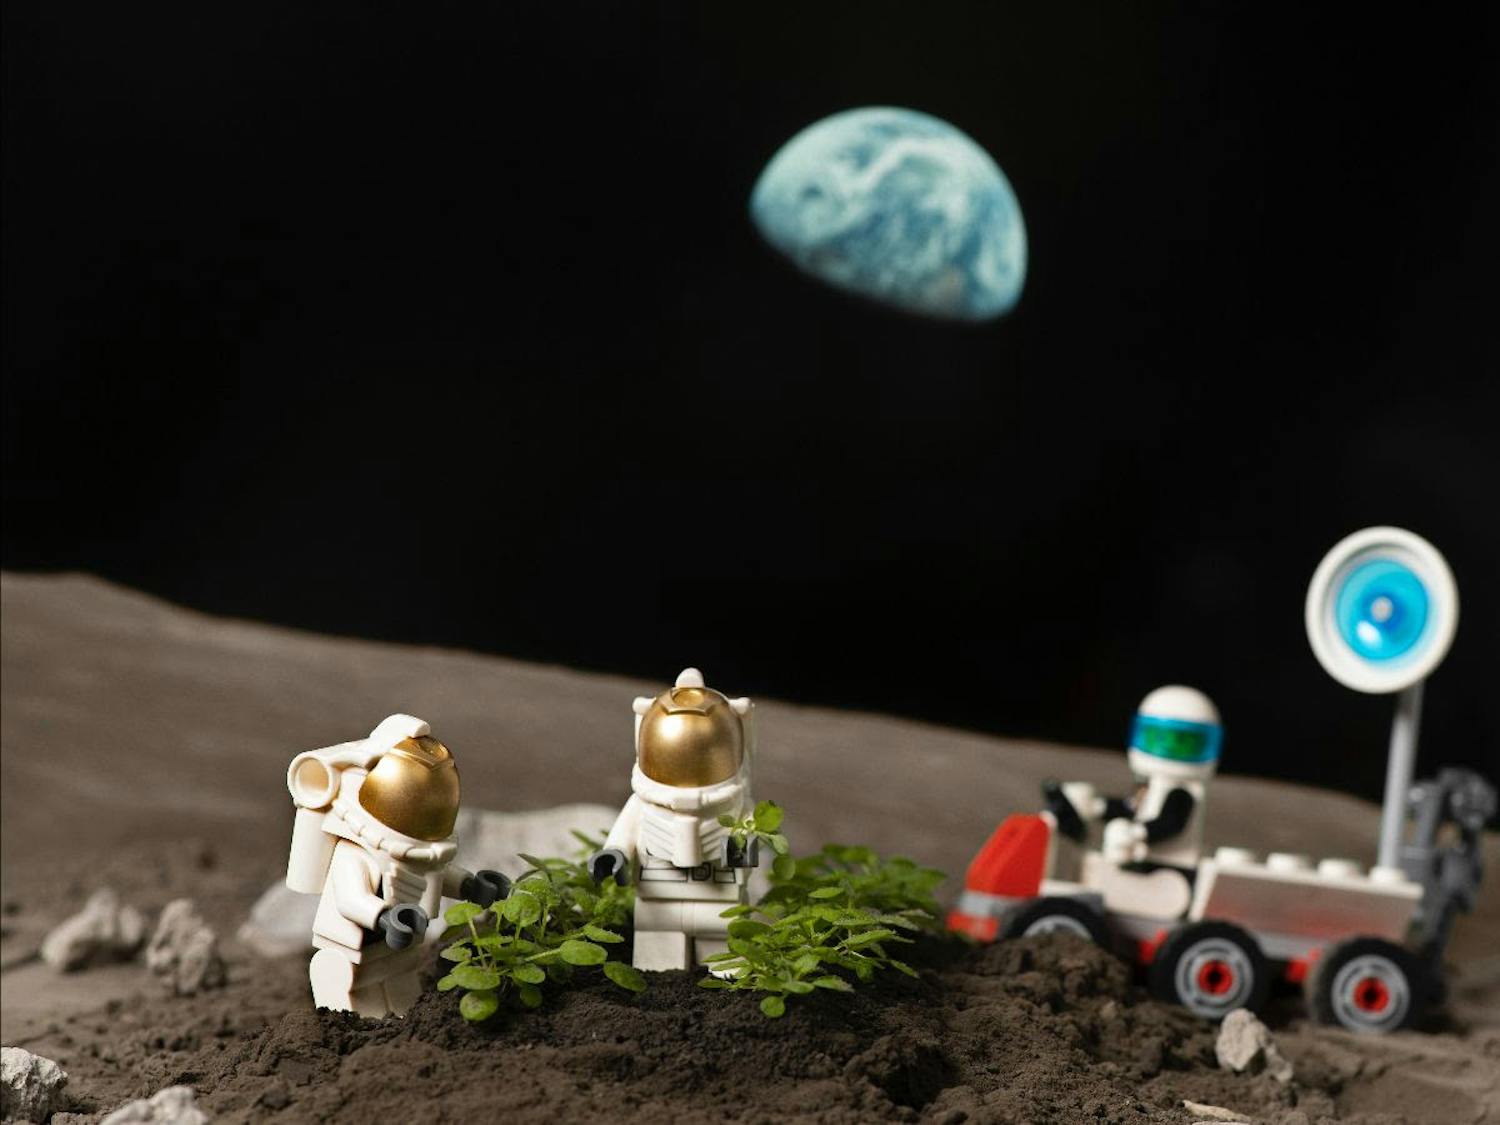 UF researchers published their findings about the growth of plants in lunar soil May 12.